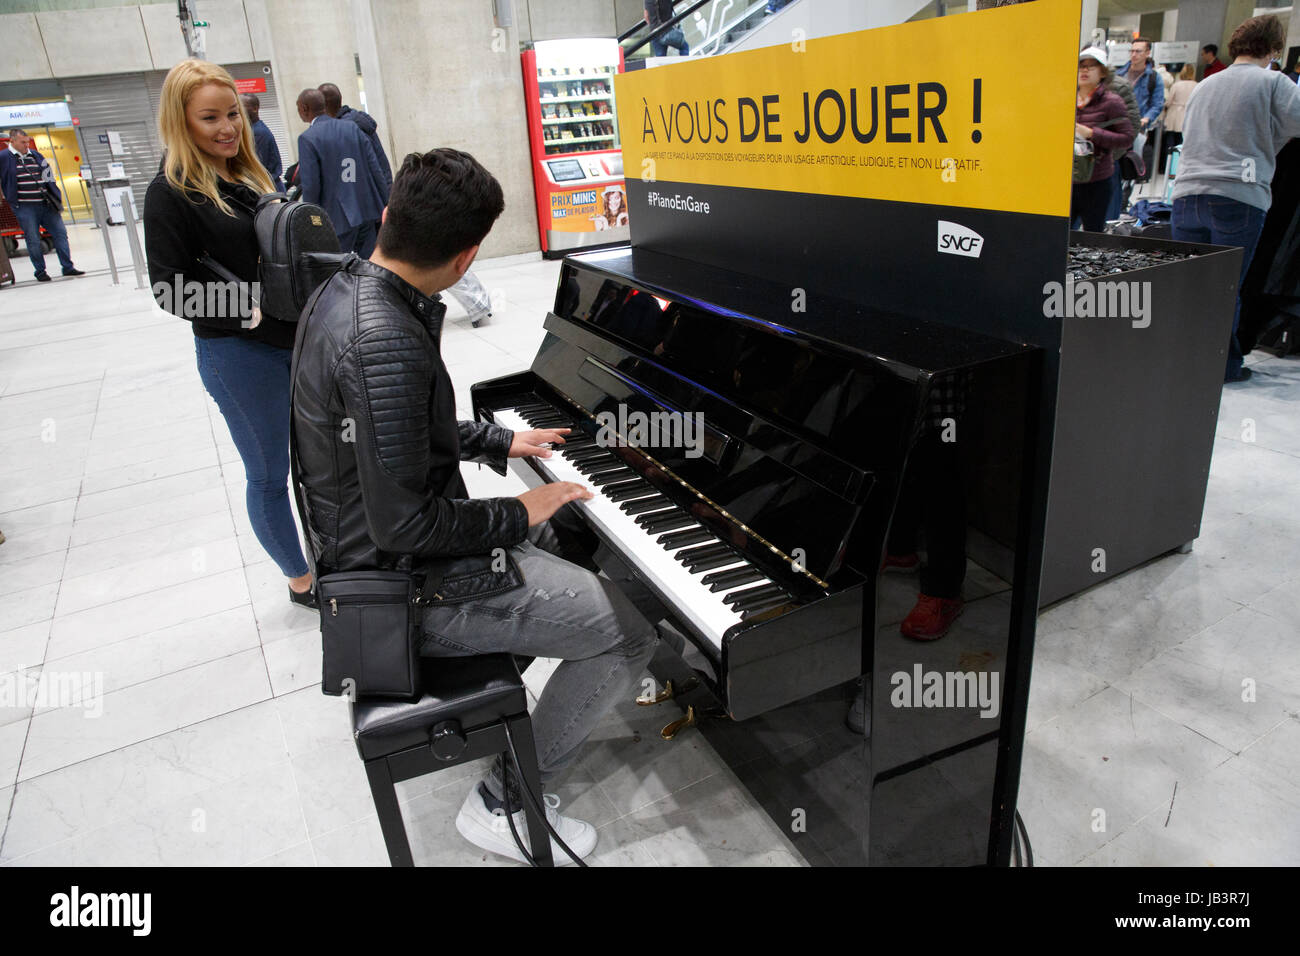 Man playing a piano in a public space, Roissy Charles de Gaulle airport,  Paris, France Stock Photo - Alamy